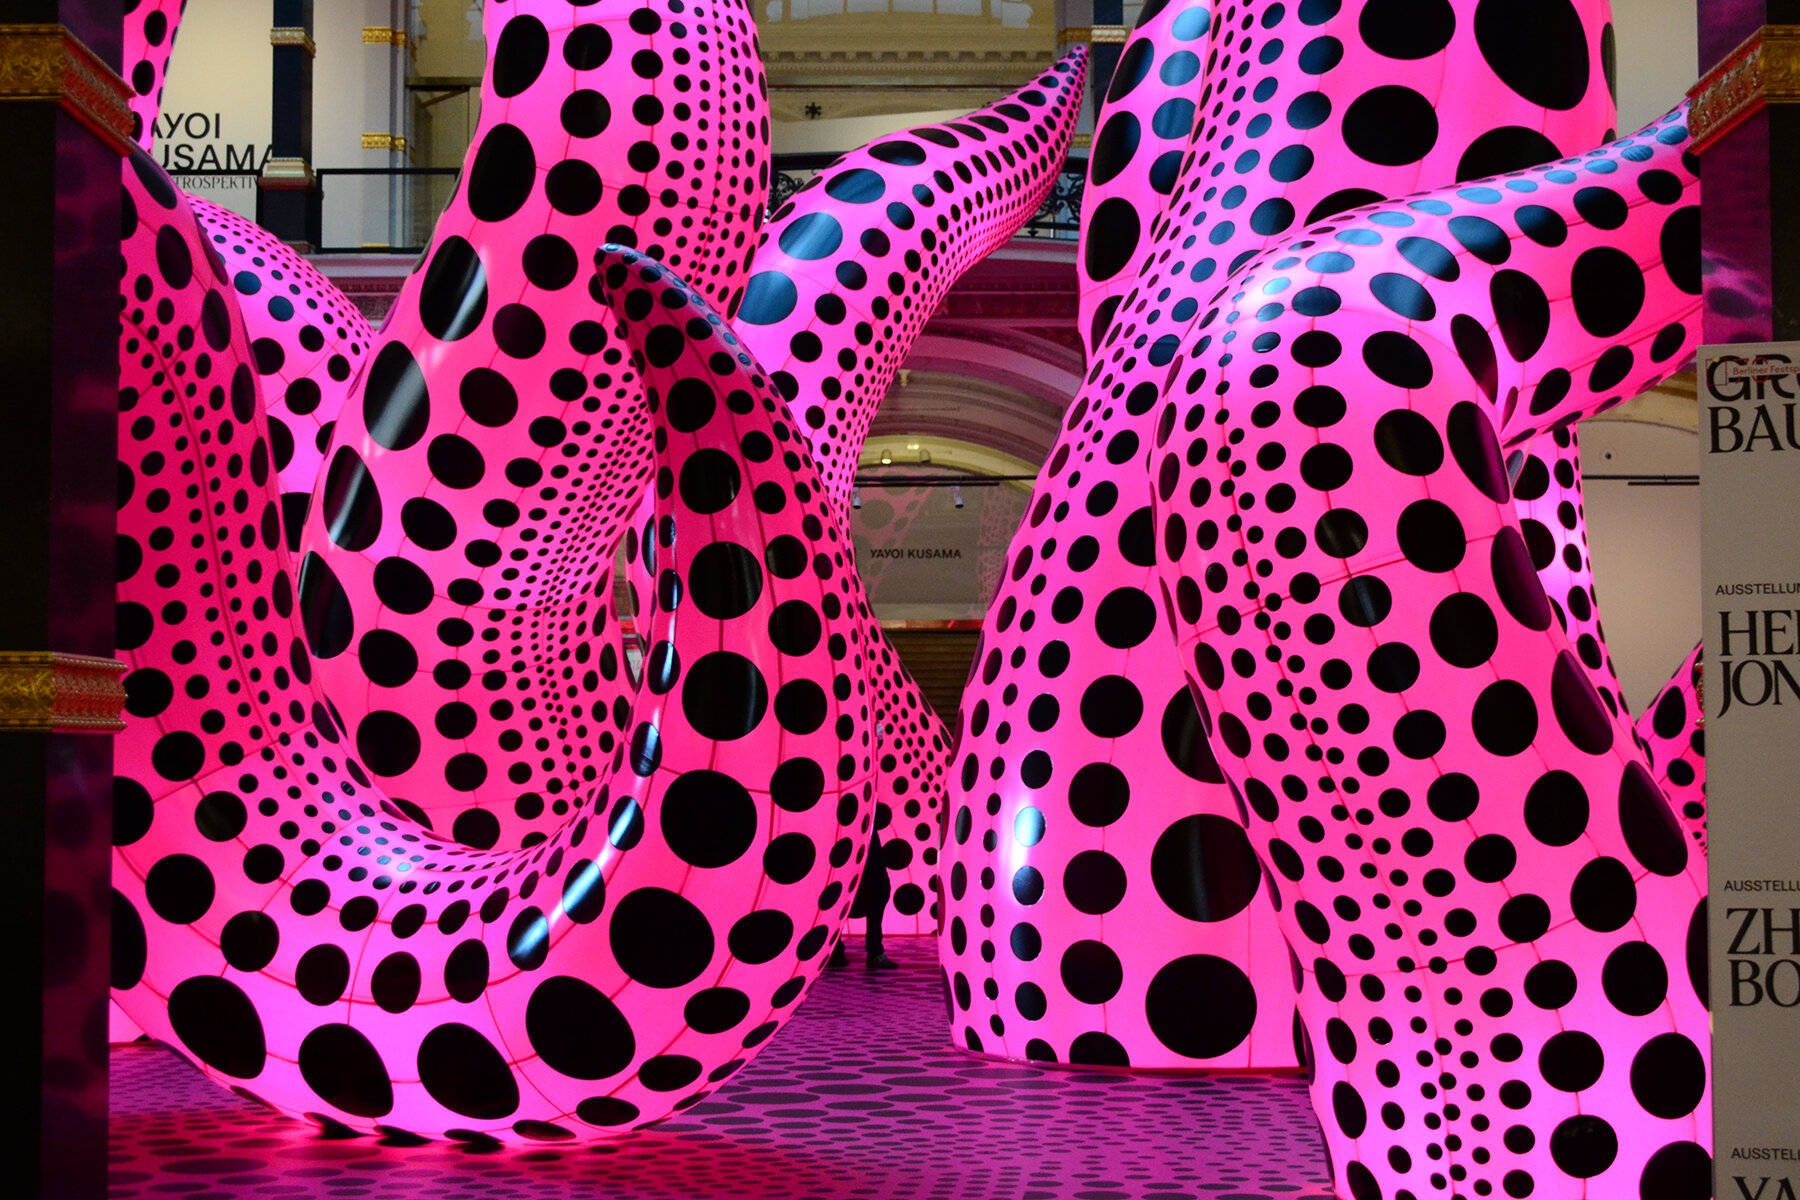 Collecting guide: 10 things to know about Yayoi Kusama